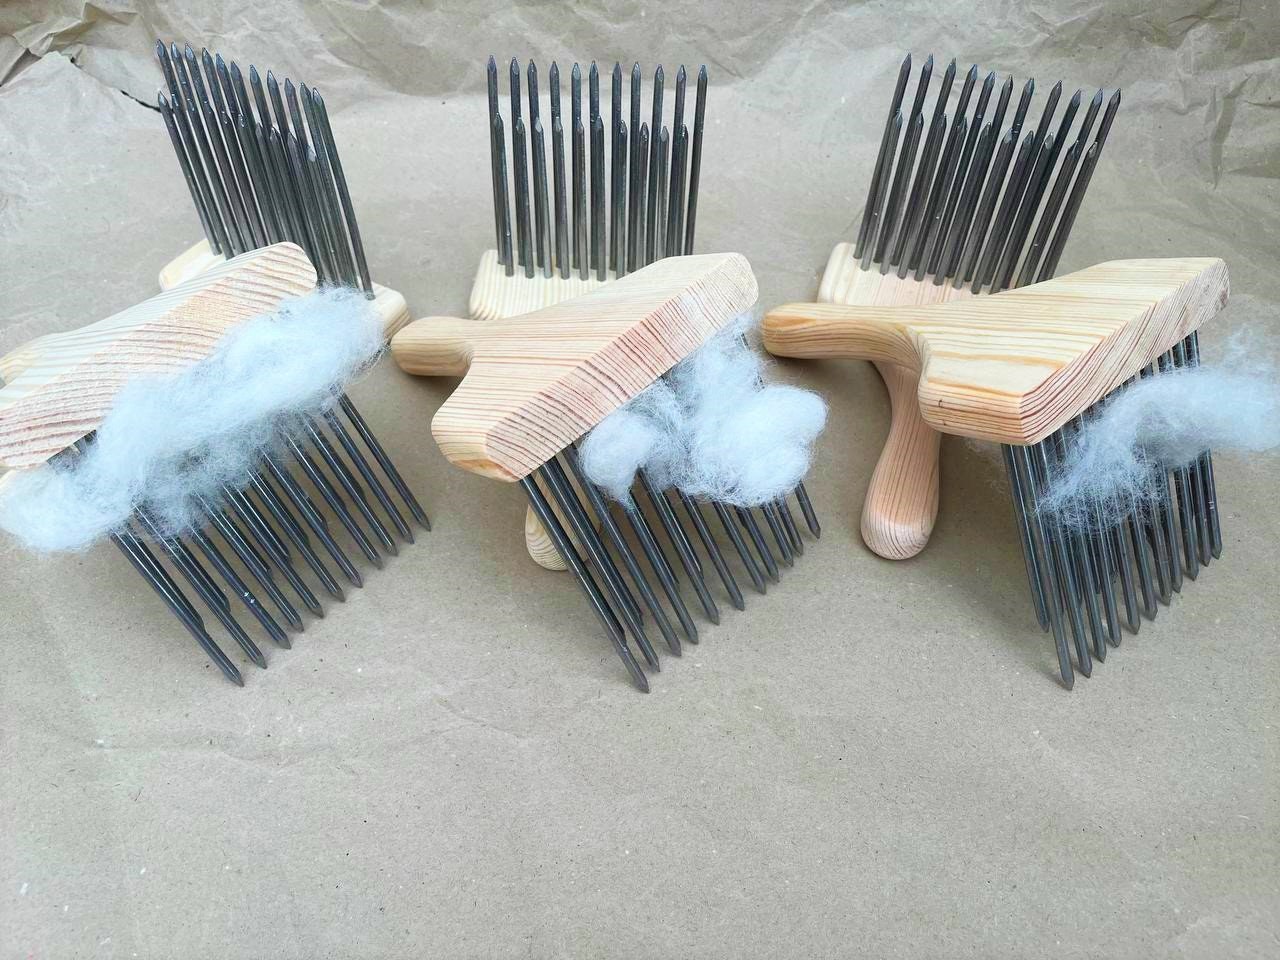 Wool combs :: Medievalcraft